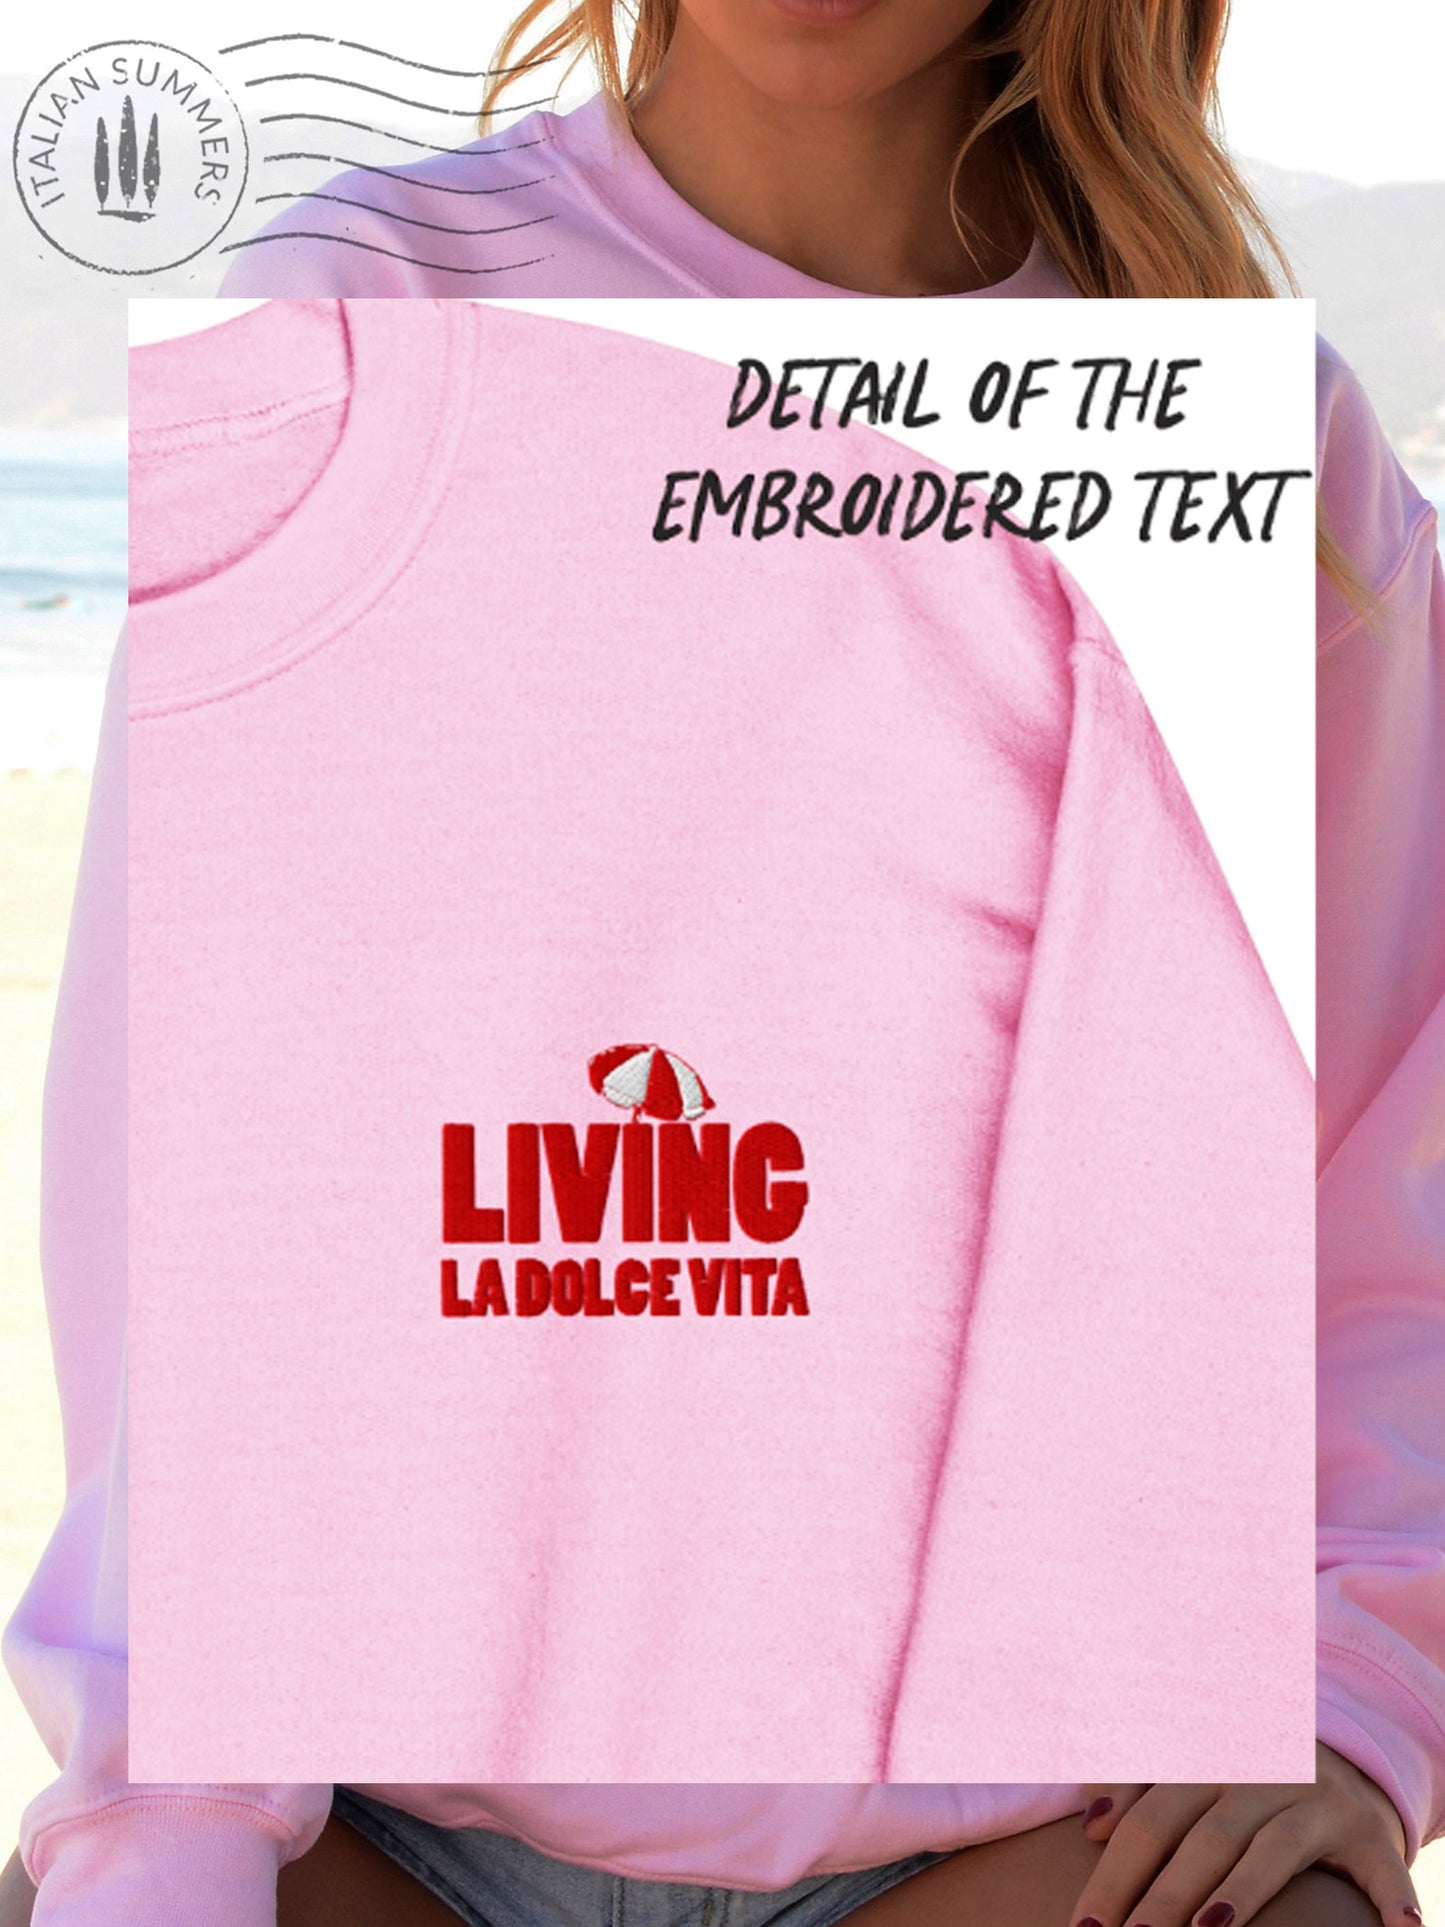 Sweatshirt LIVING la DOLCE VITA embroidered pink cotton blend - By